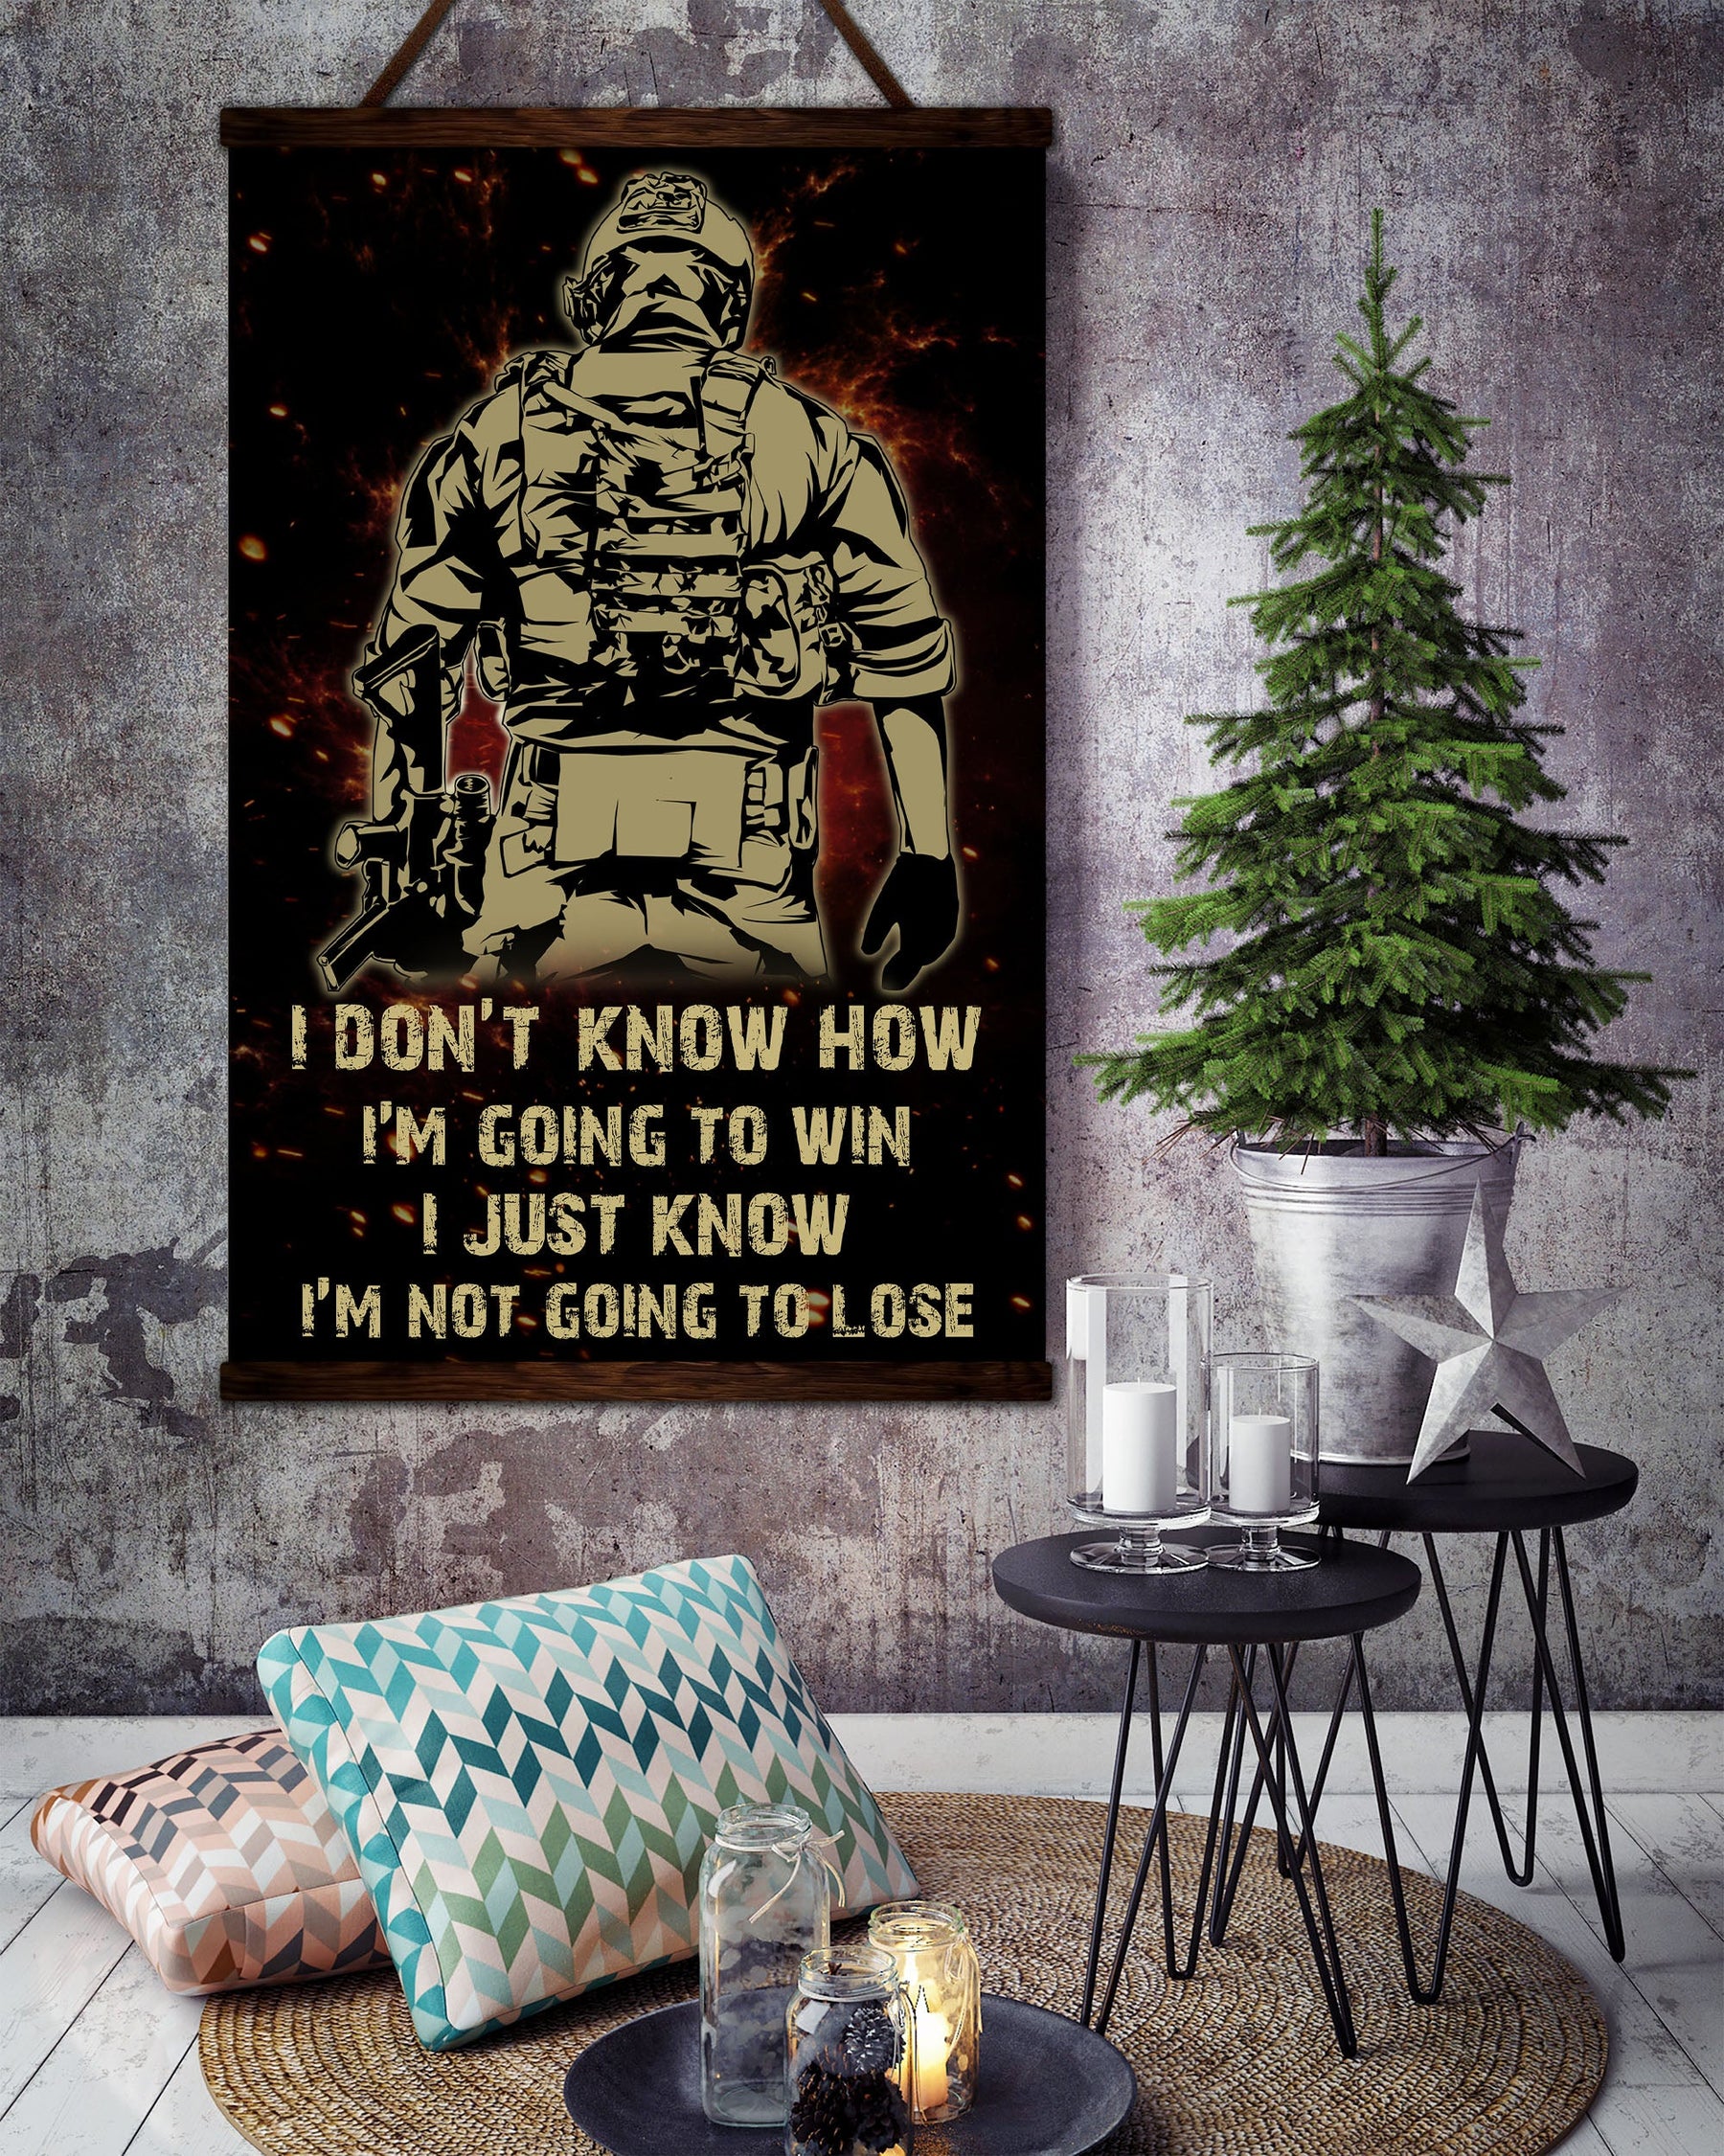 SD037 - I Don't Know How I'm Going To Win - I'm Just Know I’m Not Going To Lose - Soldier - Vertical Poster - Vertical Canvas - Soldier Poster